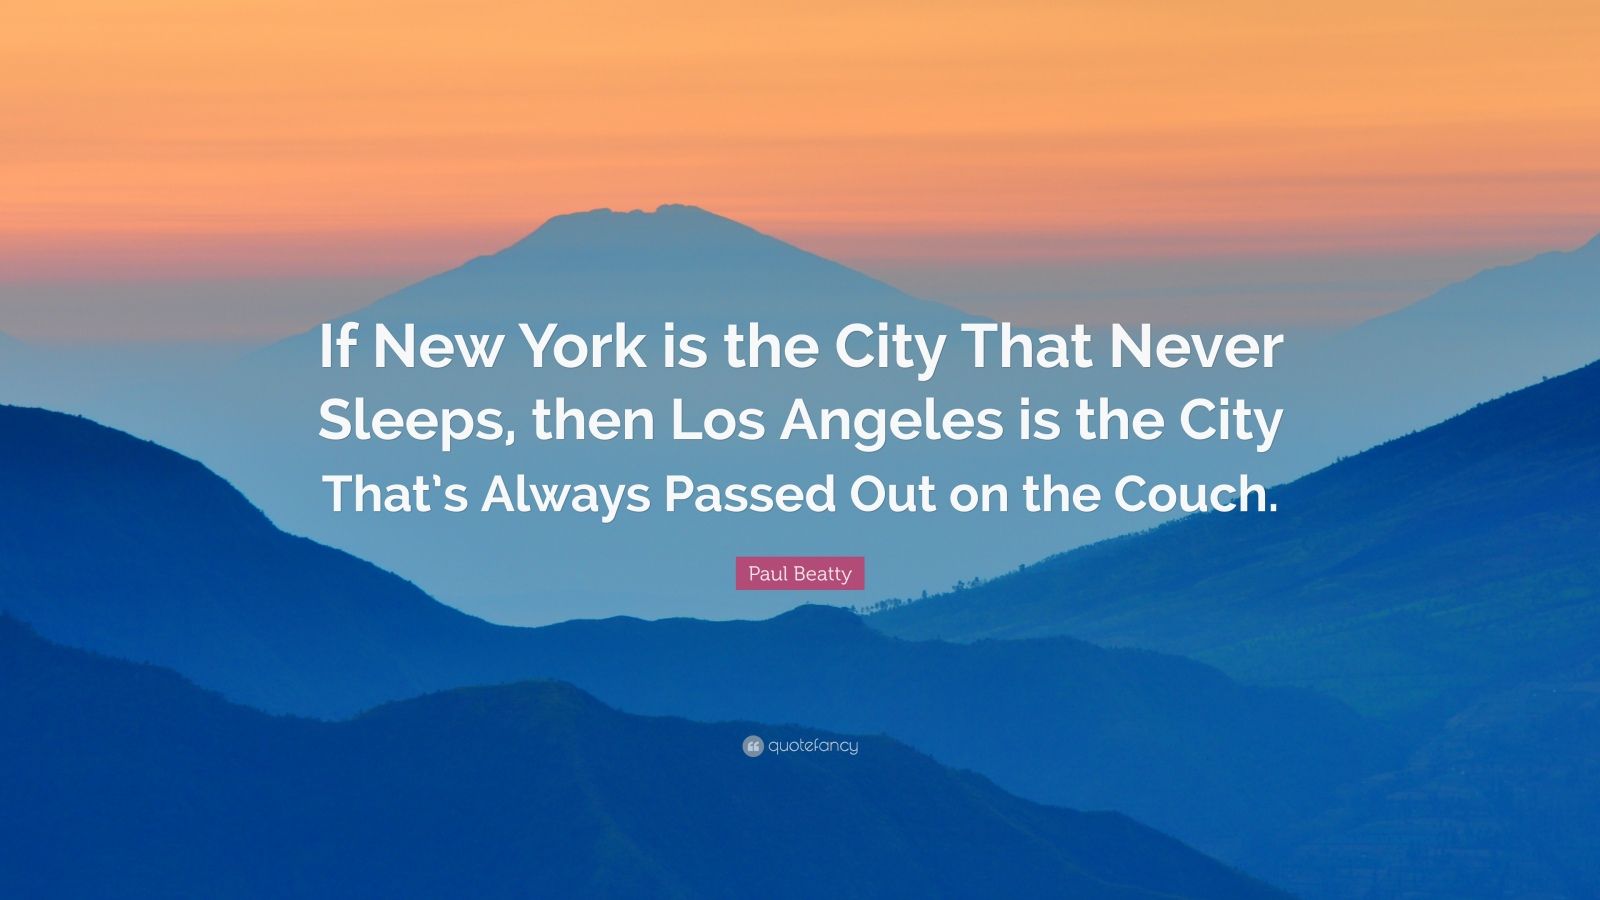 paul beatty quote "if new york is the city that never